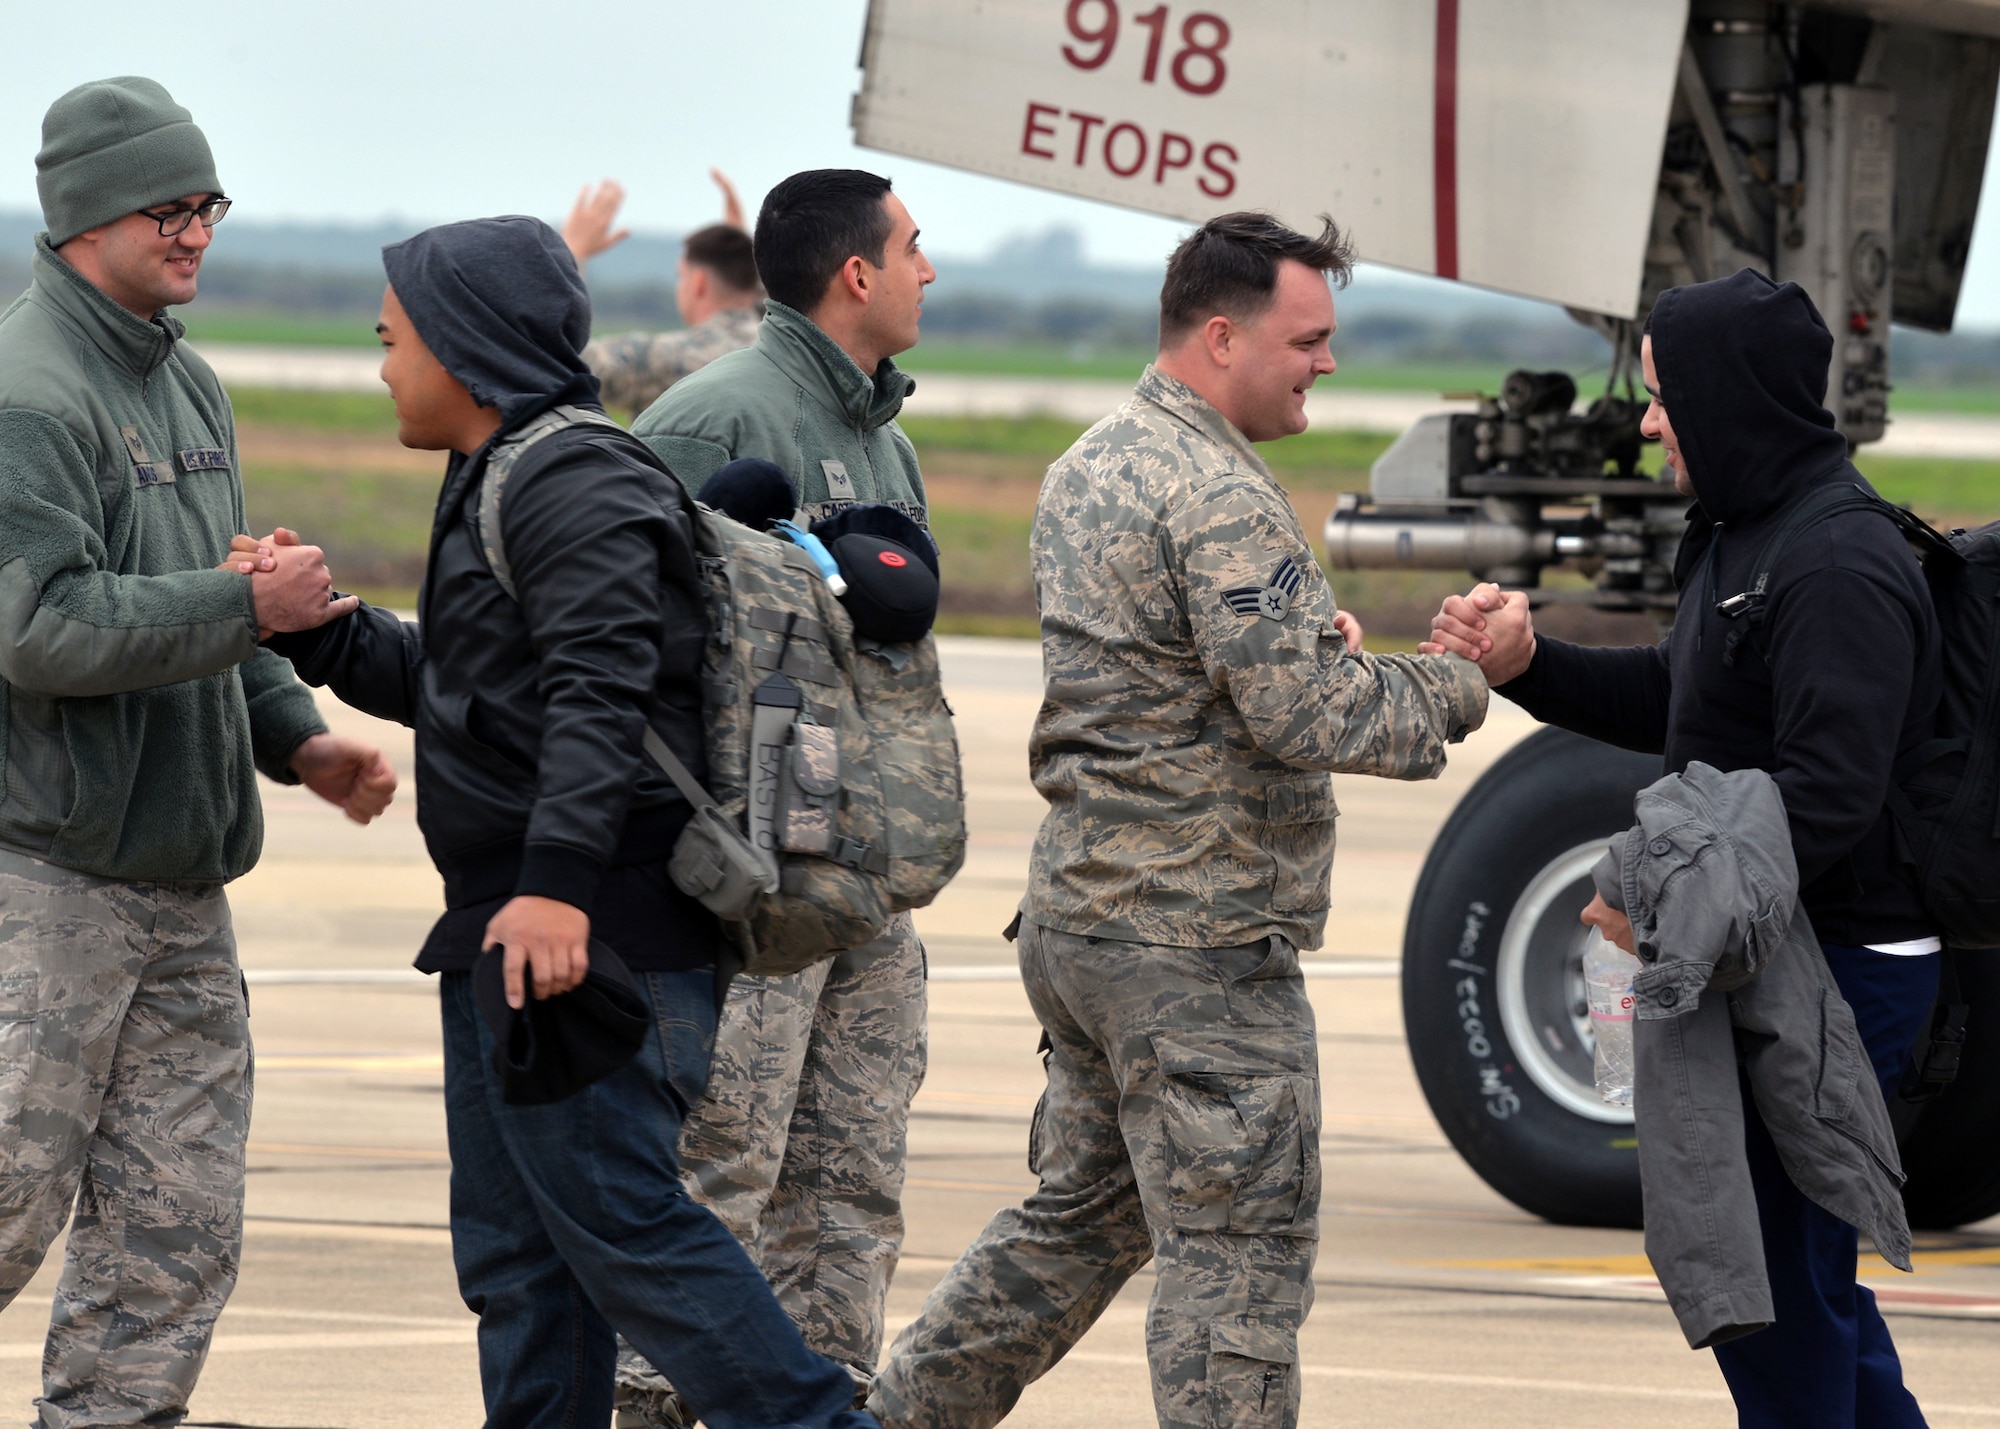 Advance-party personnel greet main-body Airmen from Barksdale Air Force Base, La., upon their arrival at Morón Air Base, Spain, Feb. 26, 2016. These Airmen will all be assigned to the 2nd Expeditionary Bomb Group during Cold Response 16, a large-scale NATO military training exercise. This year’s iteration of the biennial exercise includes maritime, ground and air operations in the Trøndelag region of Norway.